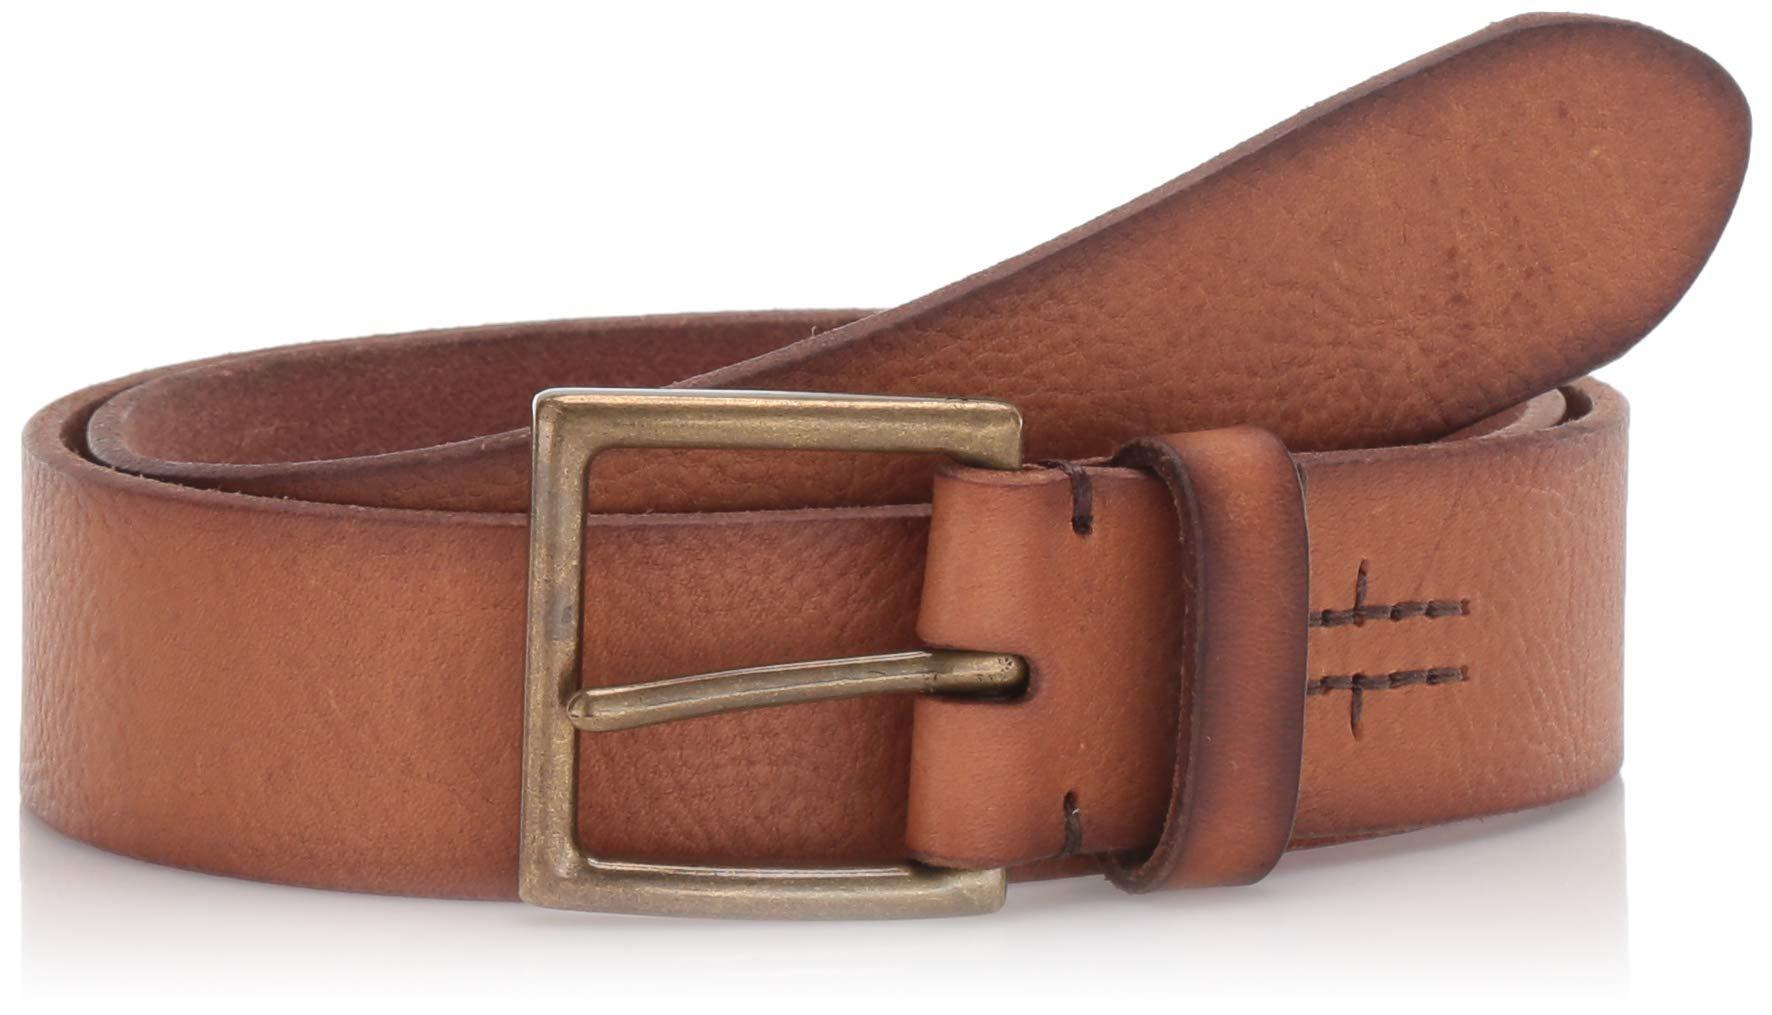 Frye Leather Campus Belt in Tan (Brown) for Men - Lyst